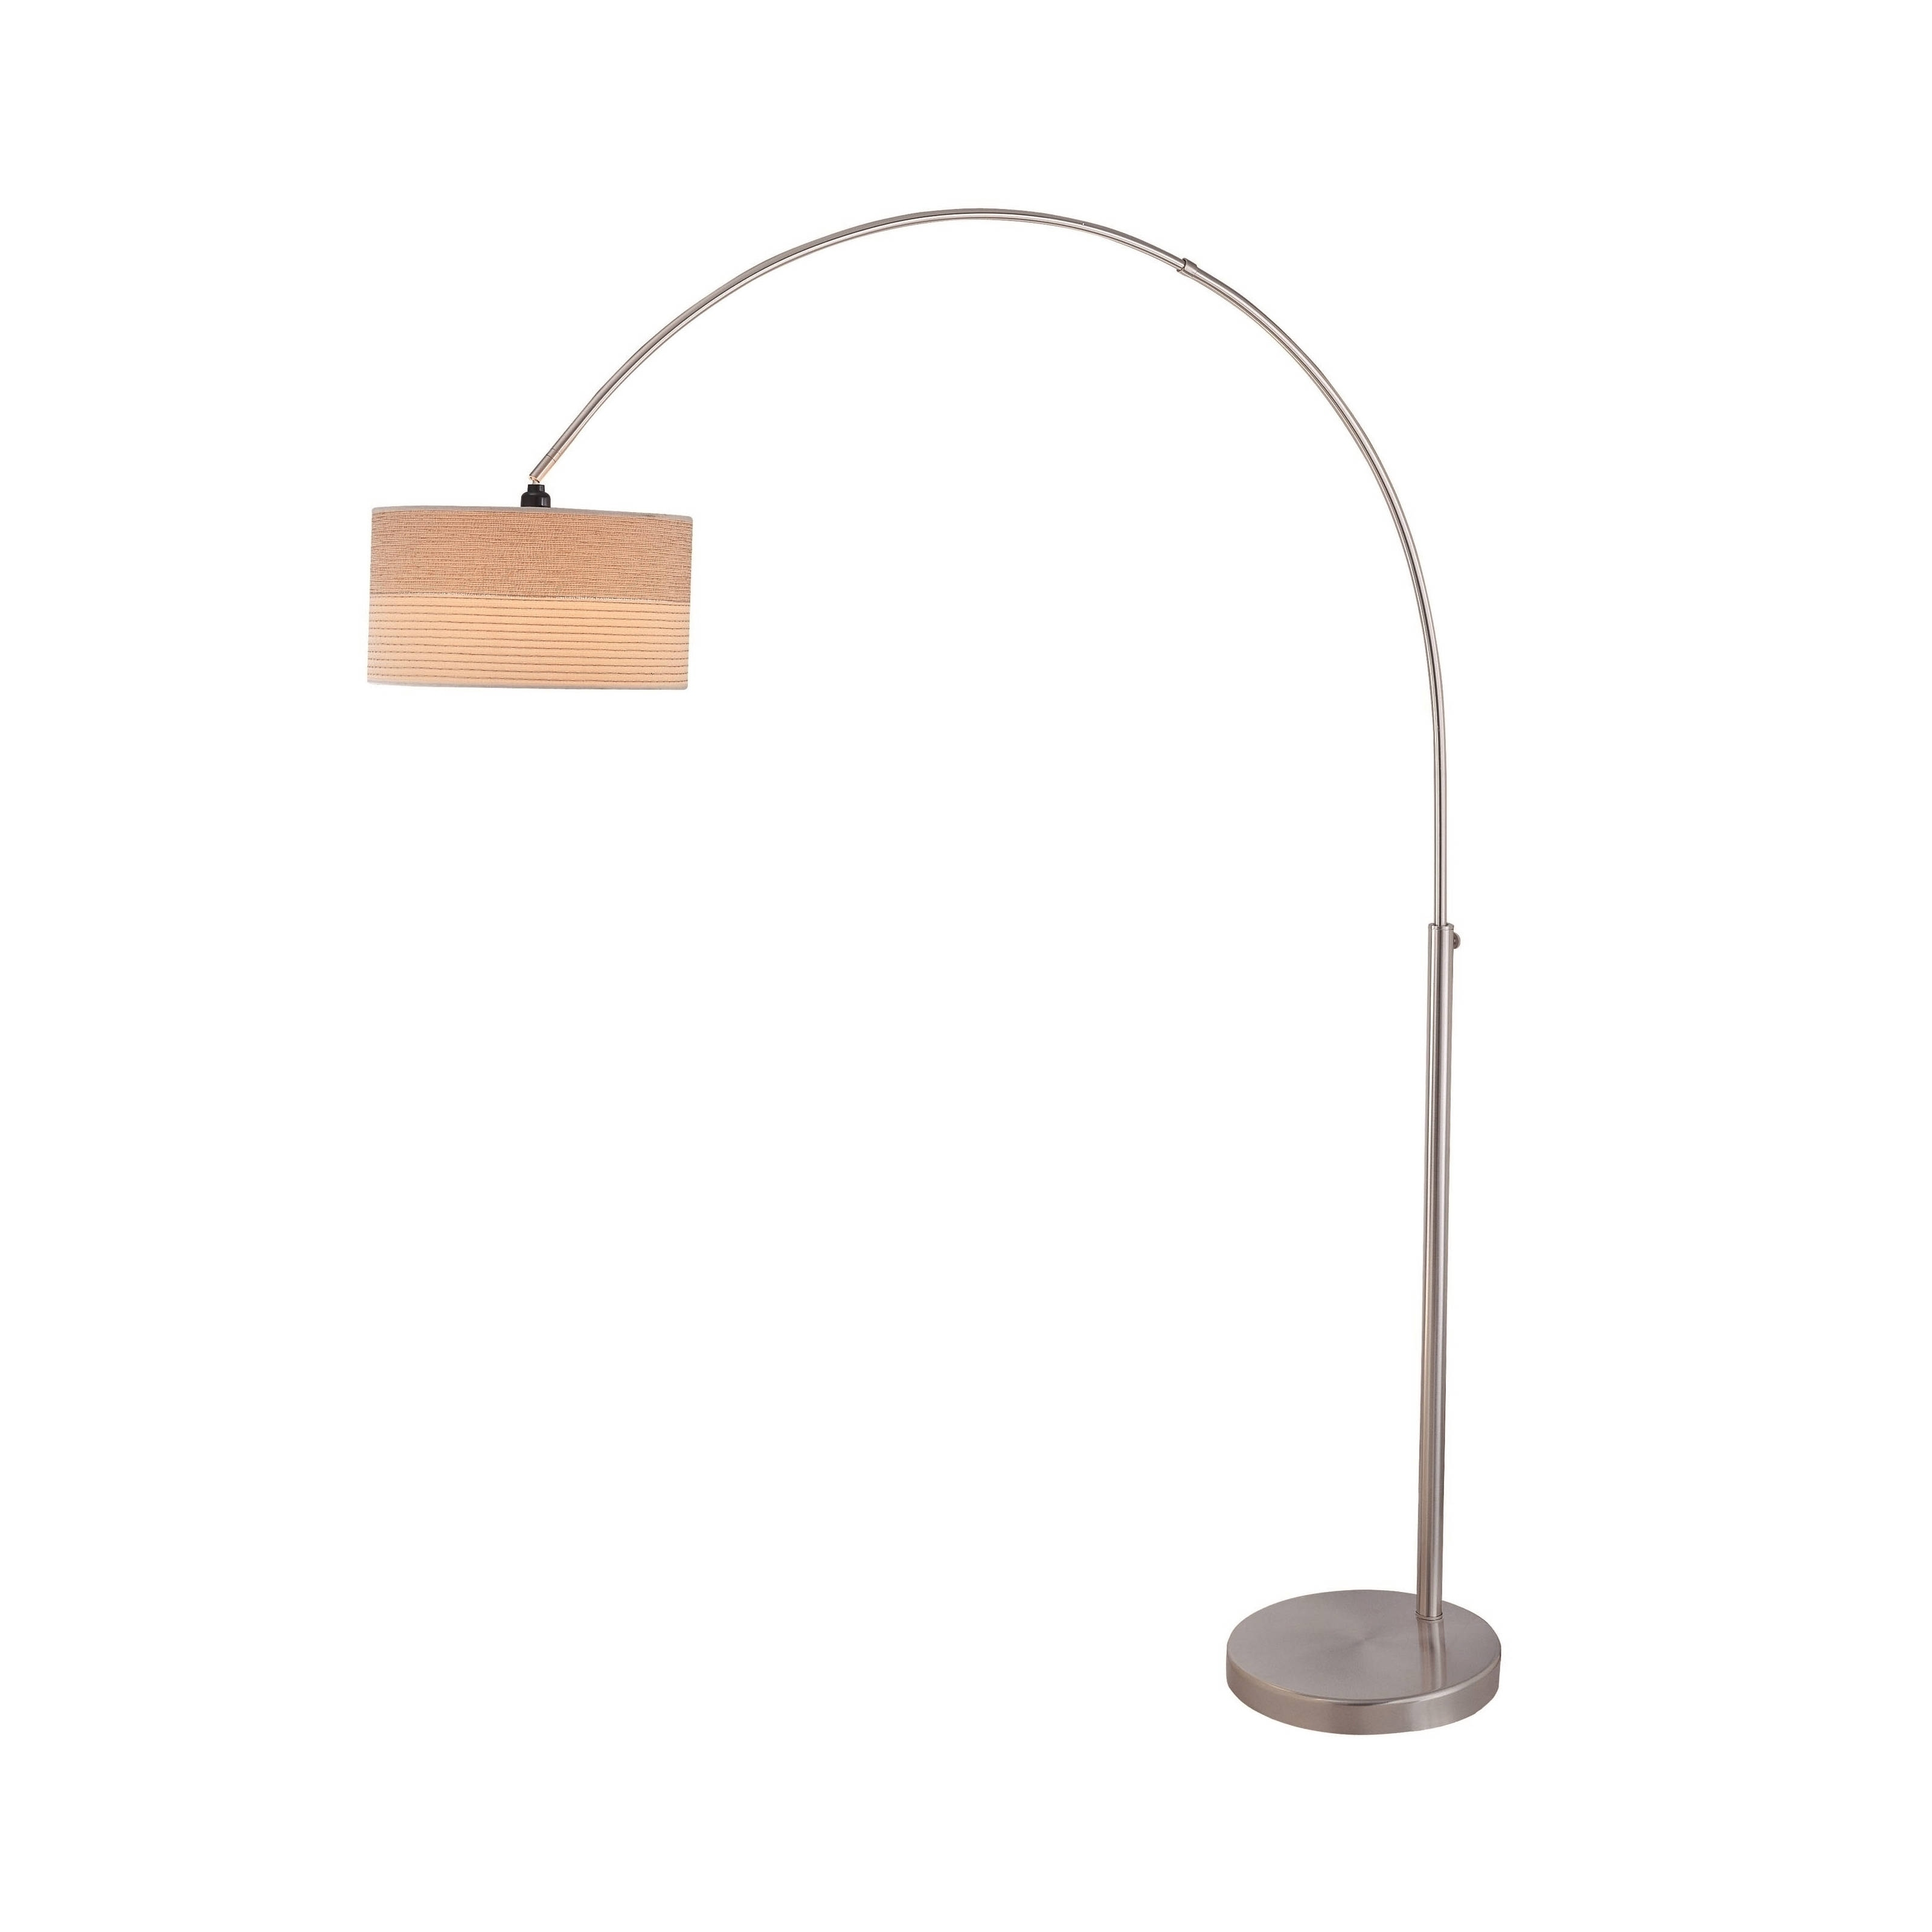 Lite Source Relaxar 1 Light Arch Floor Lamp within dimensions 3199 X 3199